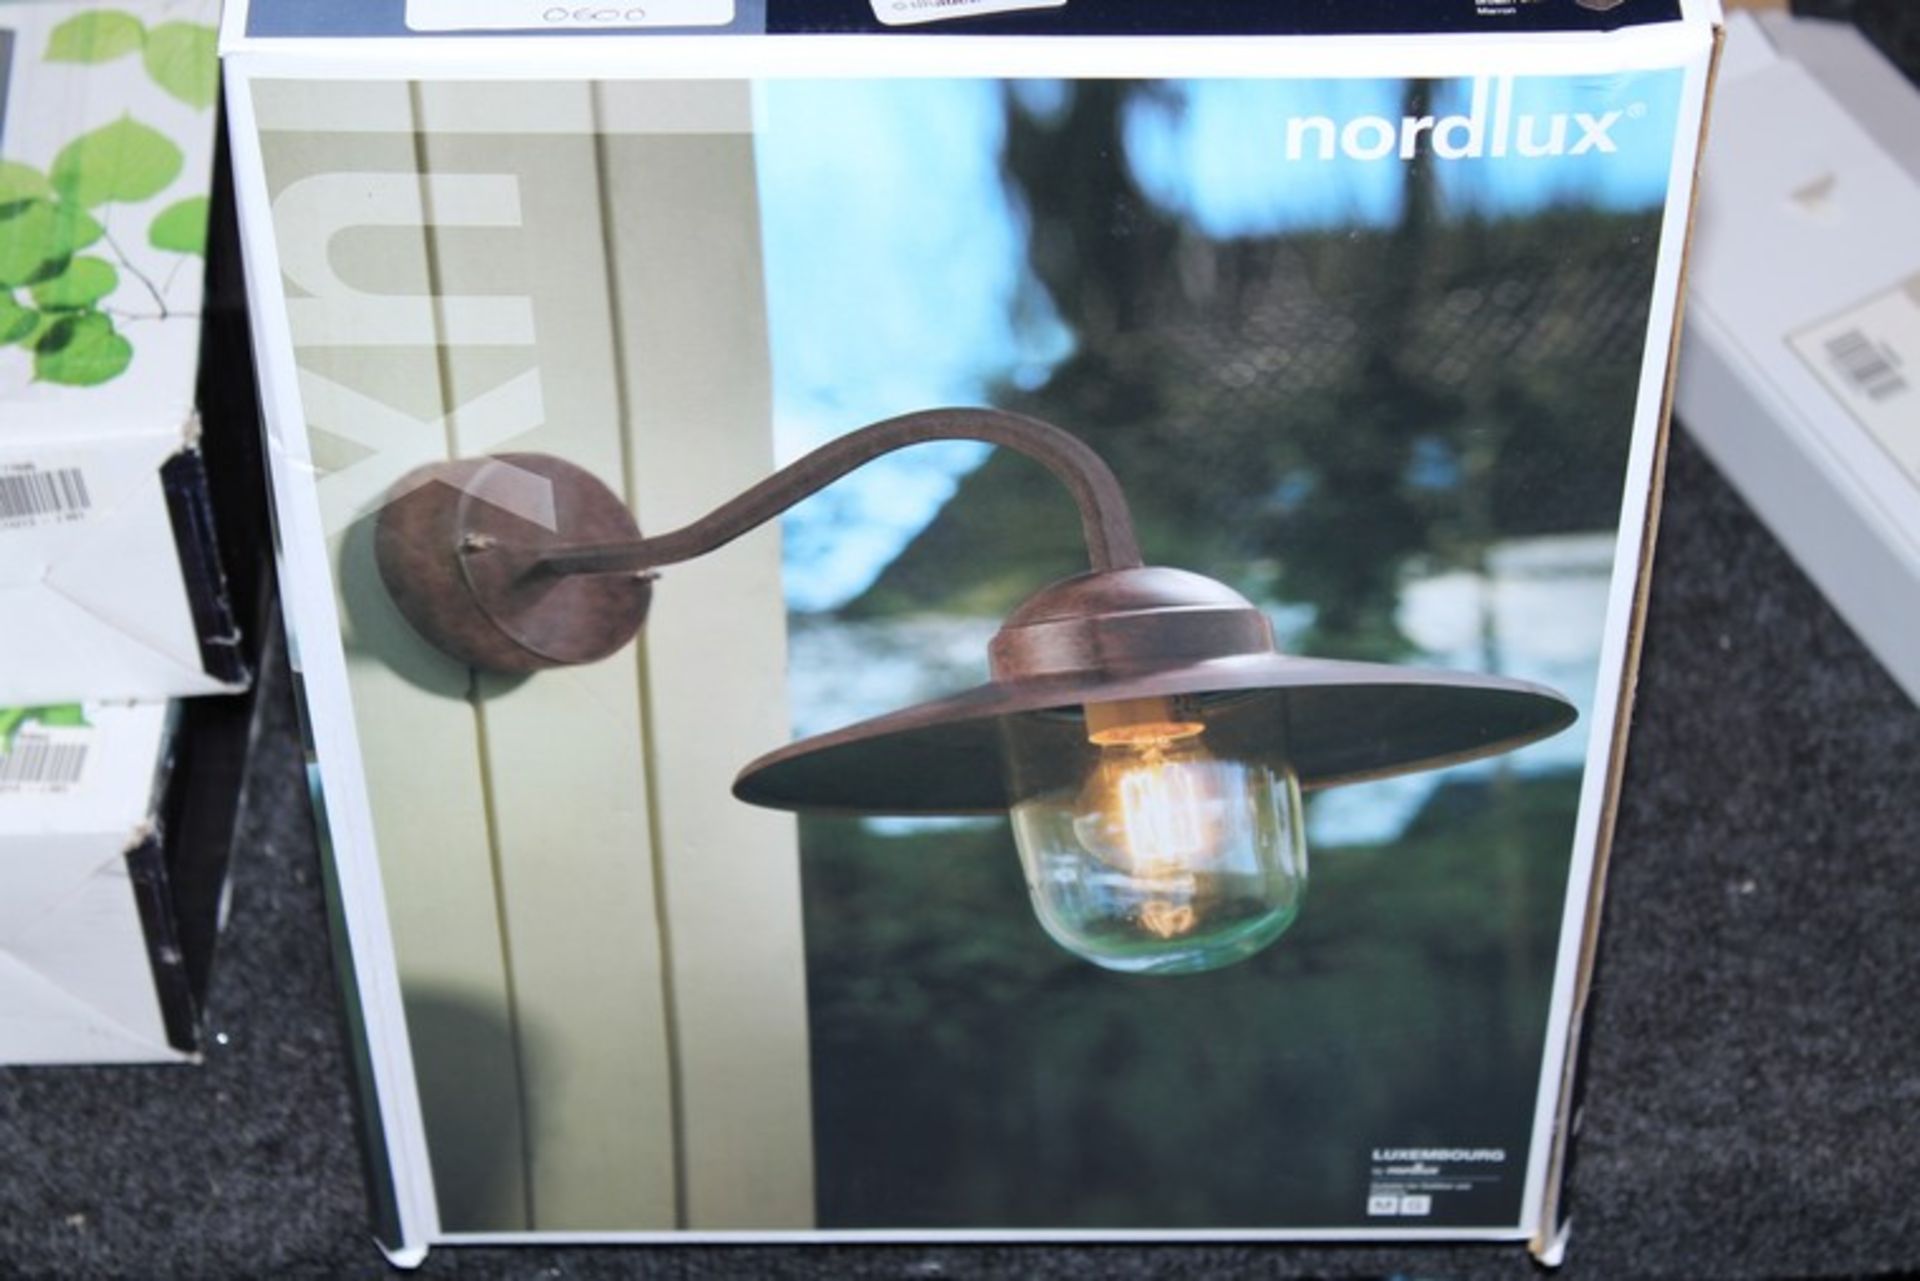 1 x BOXED NORDLUX OUTDOOR WALL LIGHT RRP £60 (16.10.17) (3717676) *PLEASE NOTE THAT THE BID PRICE IS